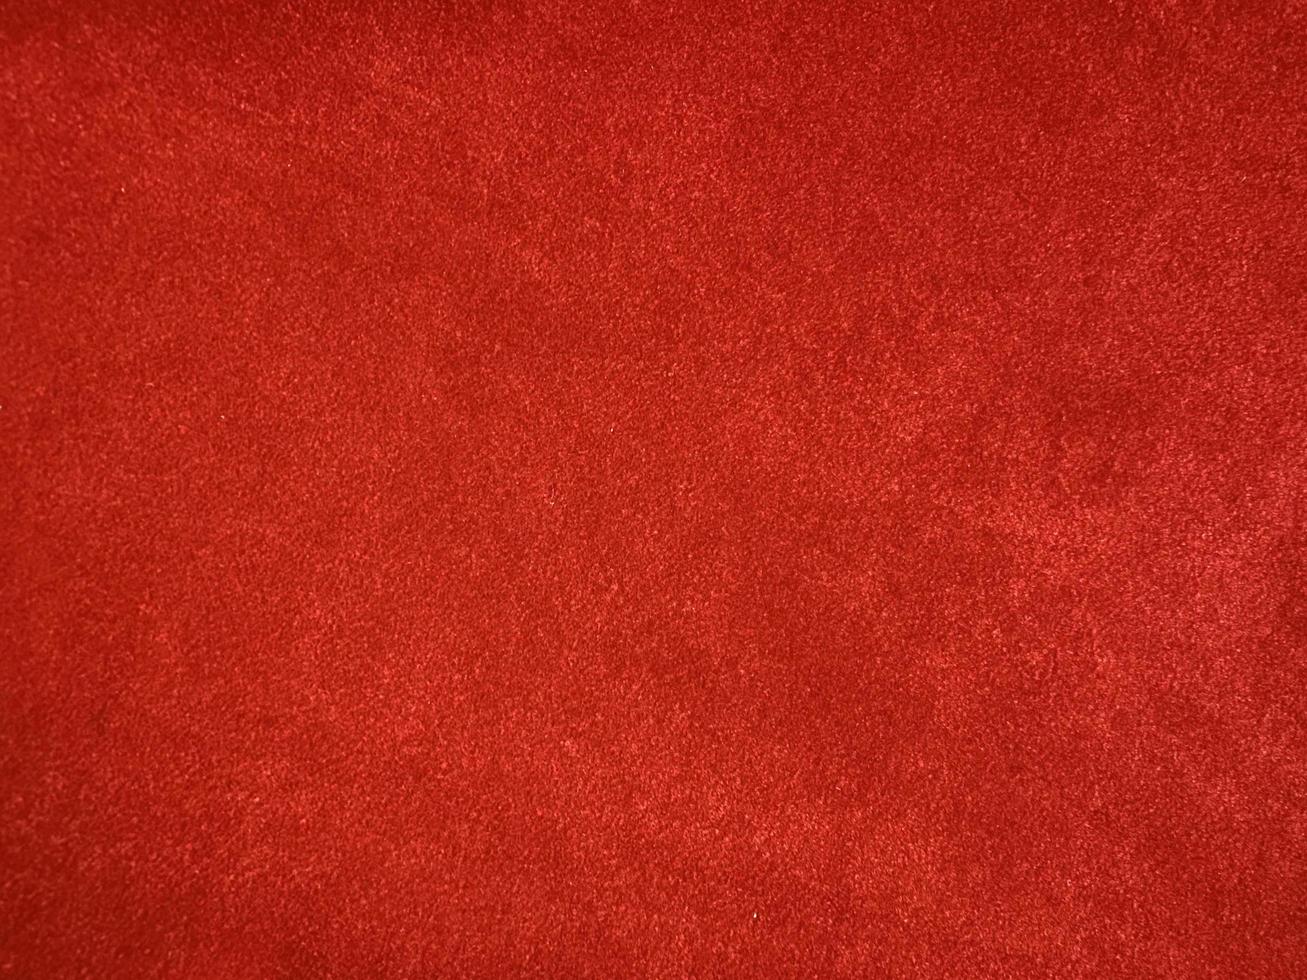 Dark red old velvet fabric texture used as background. Empty red fabric background of soft and smooth textile material. There is space for text.Chinese New Year,valentine photo